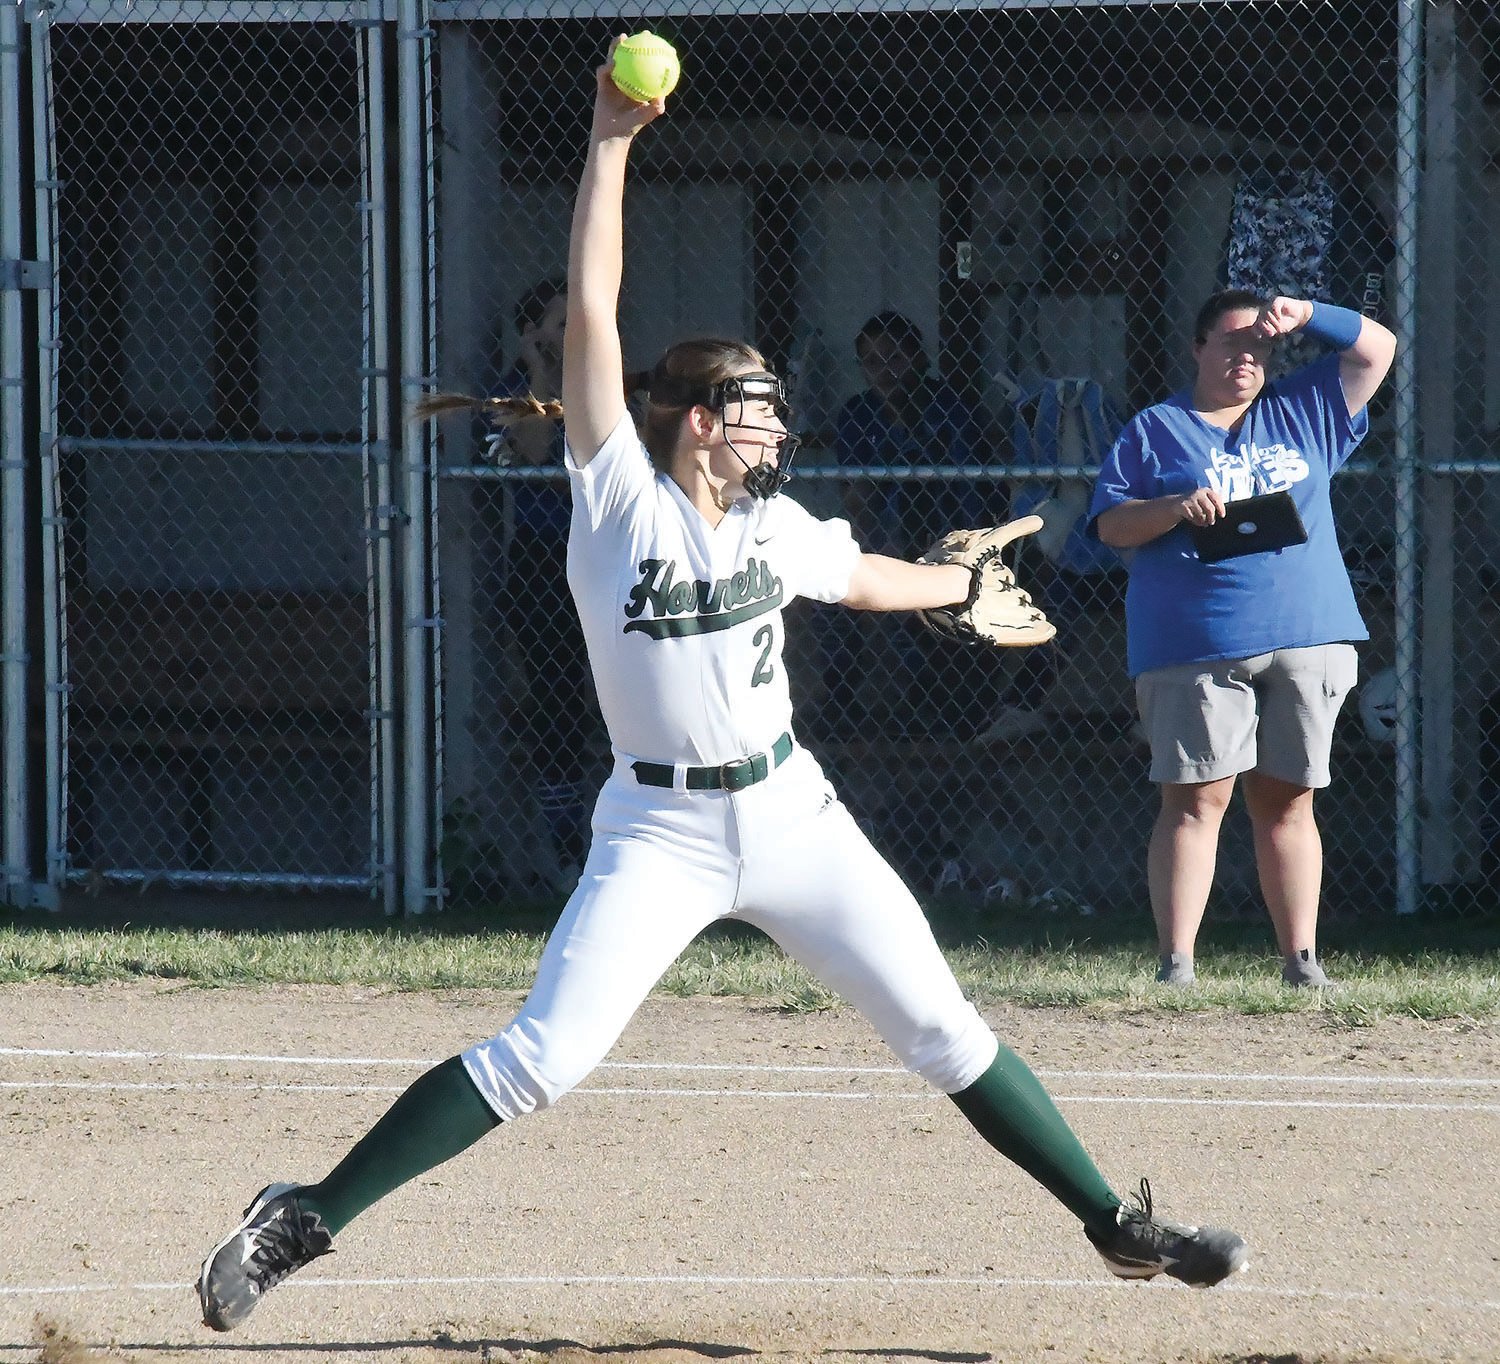 Westran's Mallory Brown pitched a shutout in Monday's victory over Sturgeon.